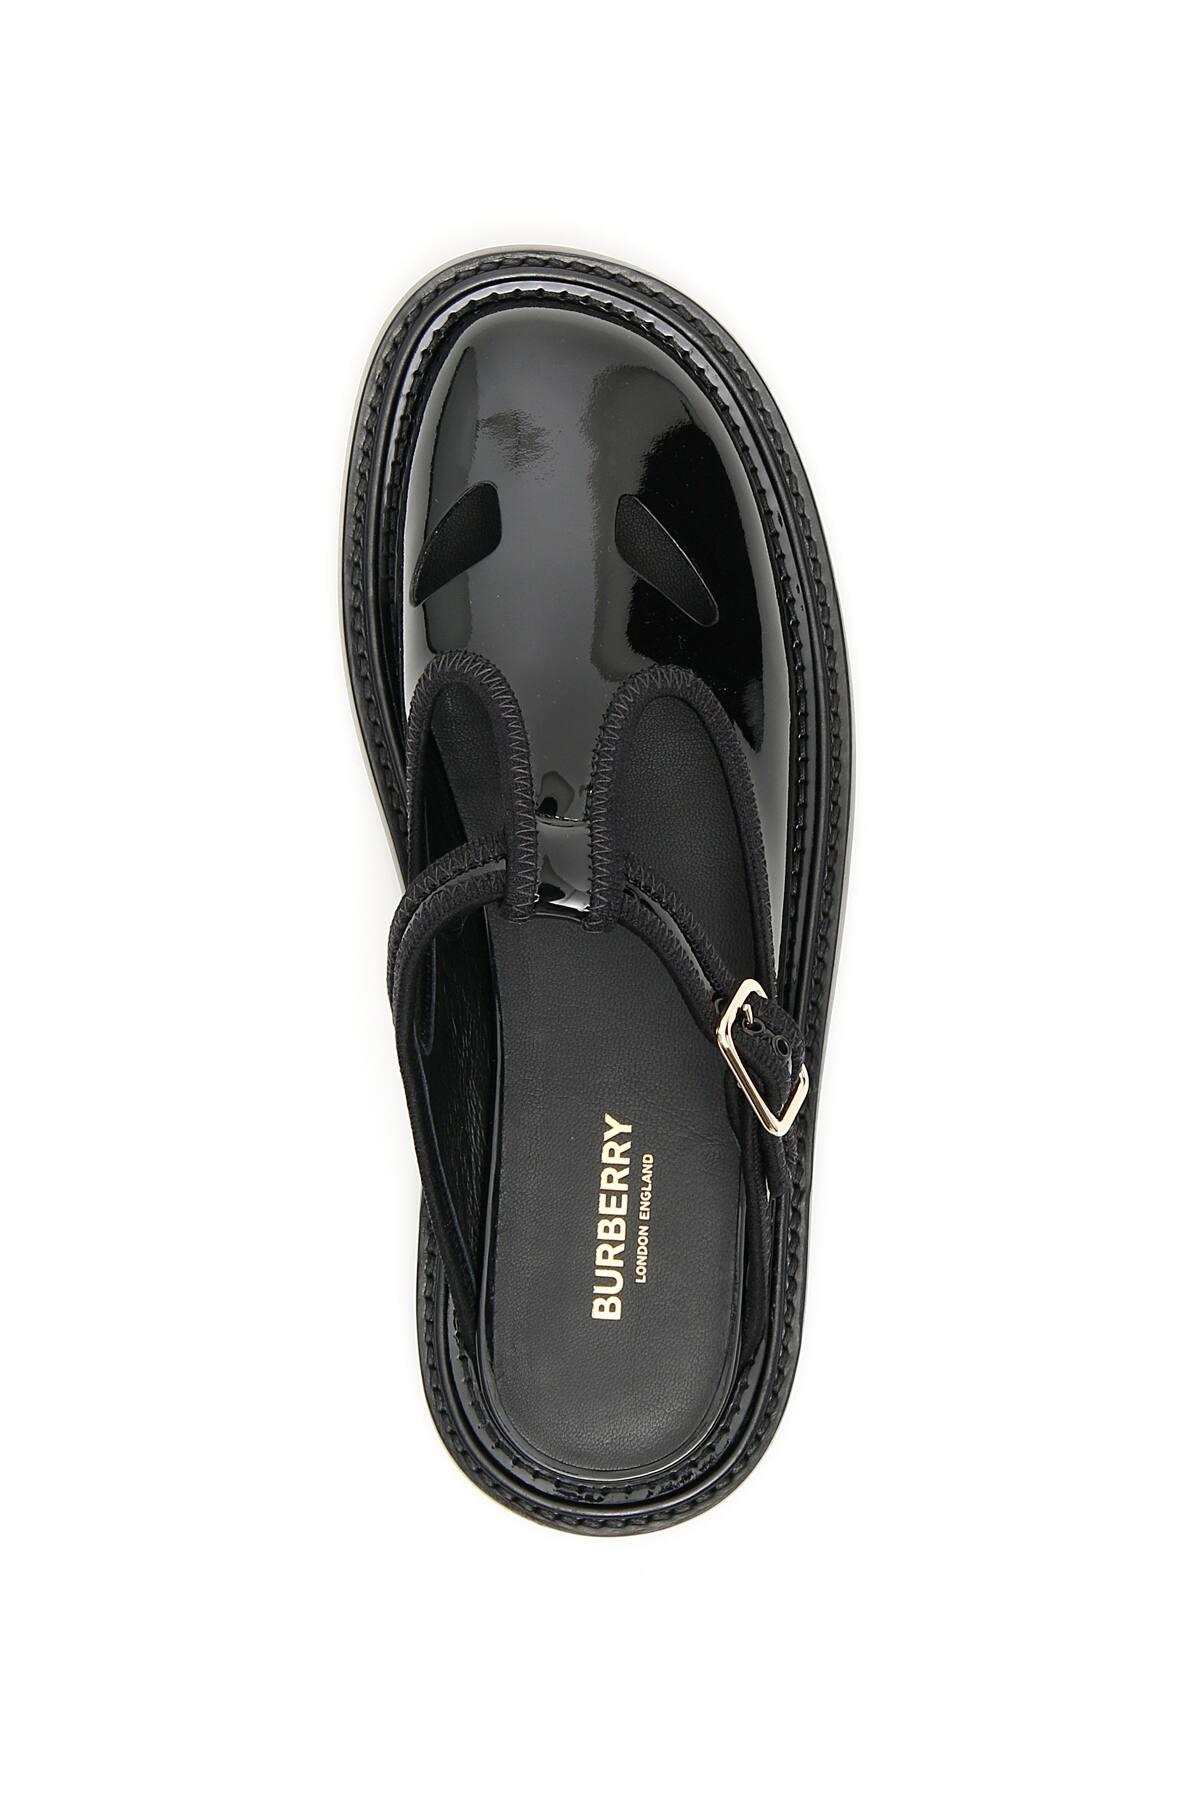 Burberry Leather Alannis Mules in Black - Lyst